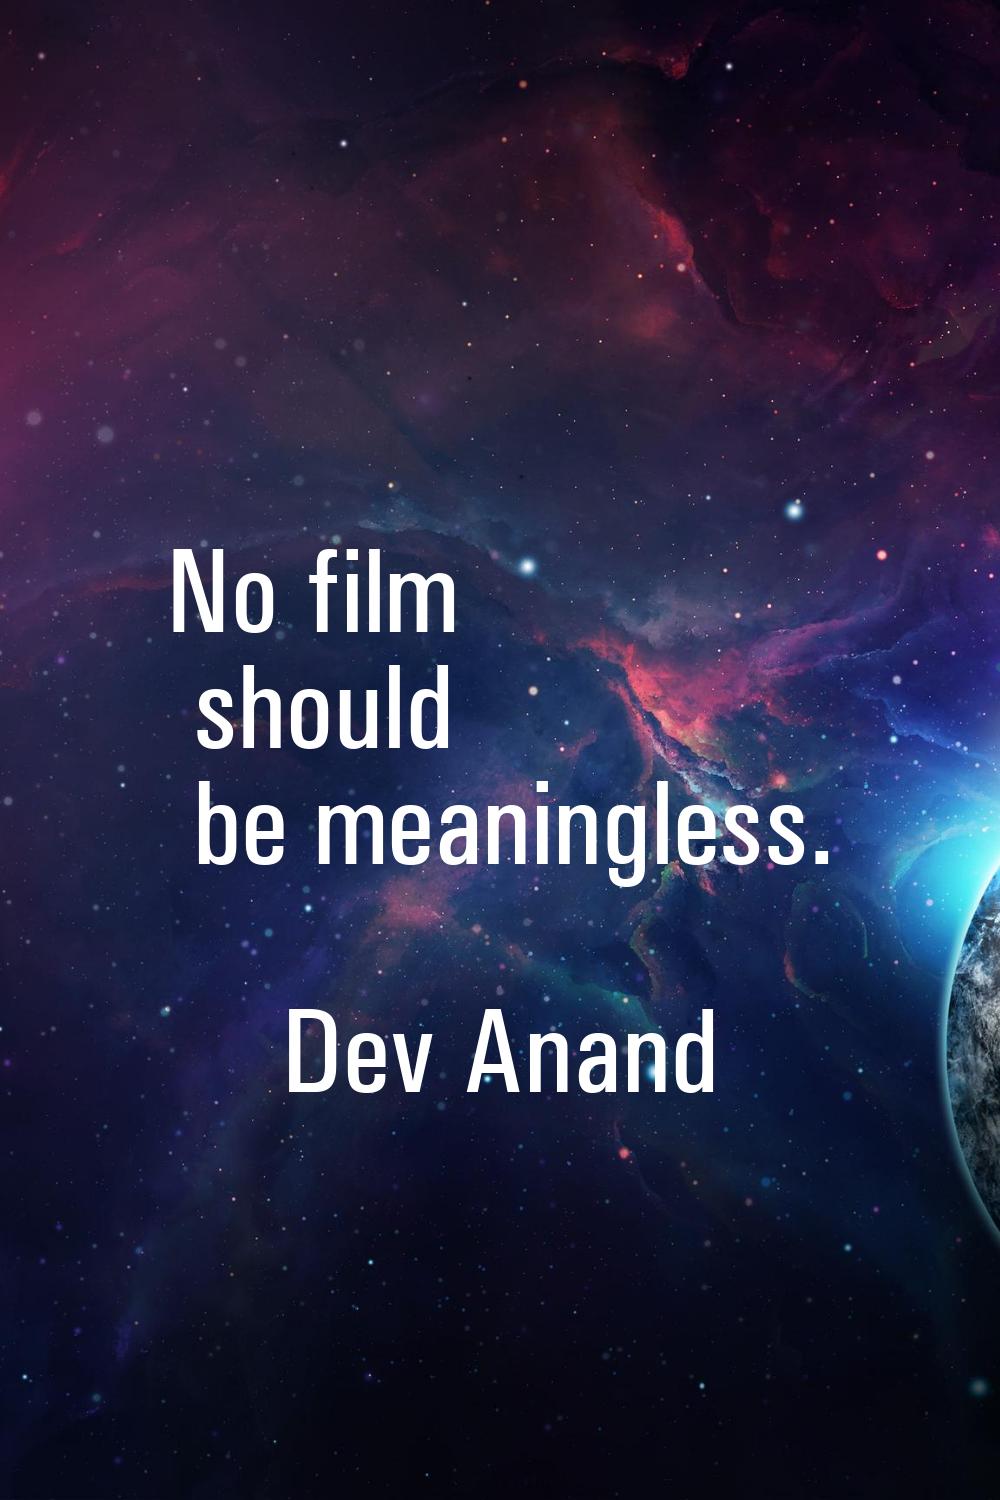 No film should be meaningless.